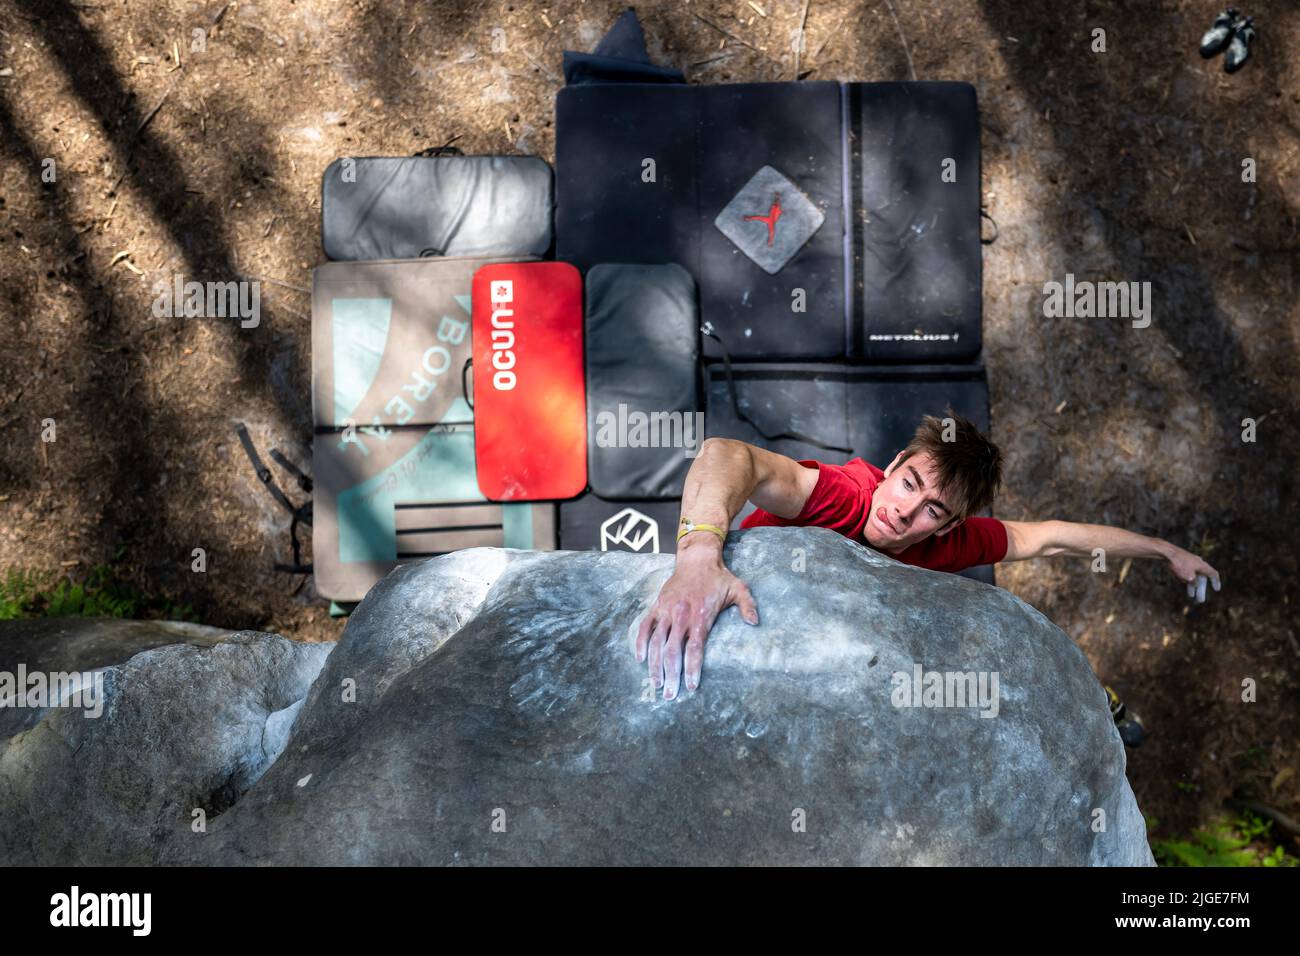 Athletic young man is jumping for top hold in famous and hard dyno boulder problem called 'Cannon Ball -7b'. Fontainbleau, France, Europe. Stock Photo